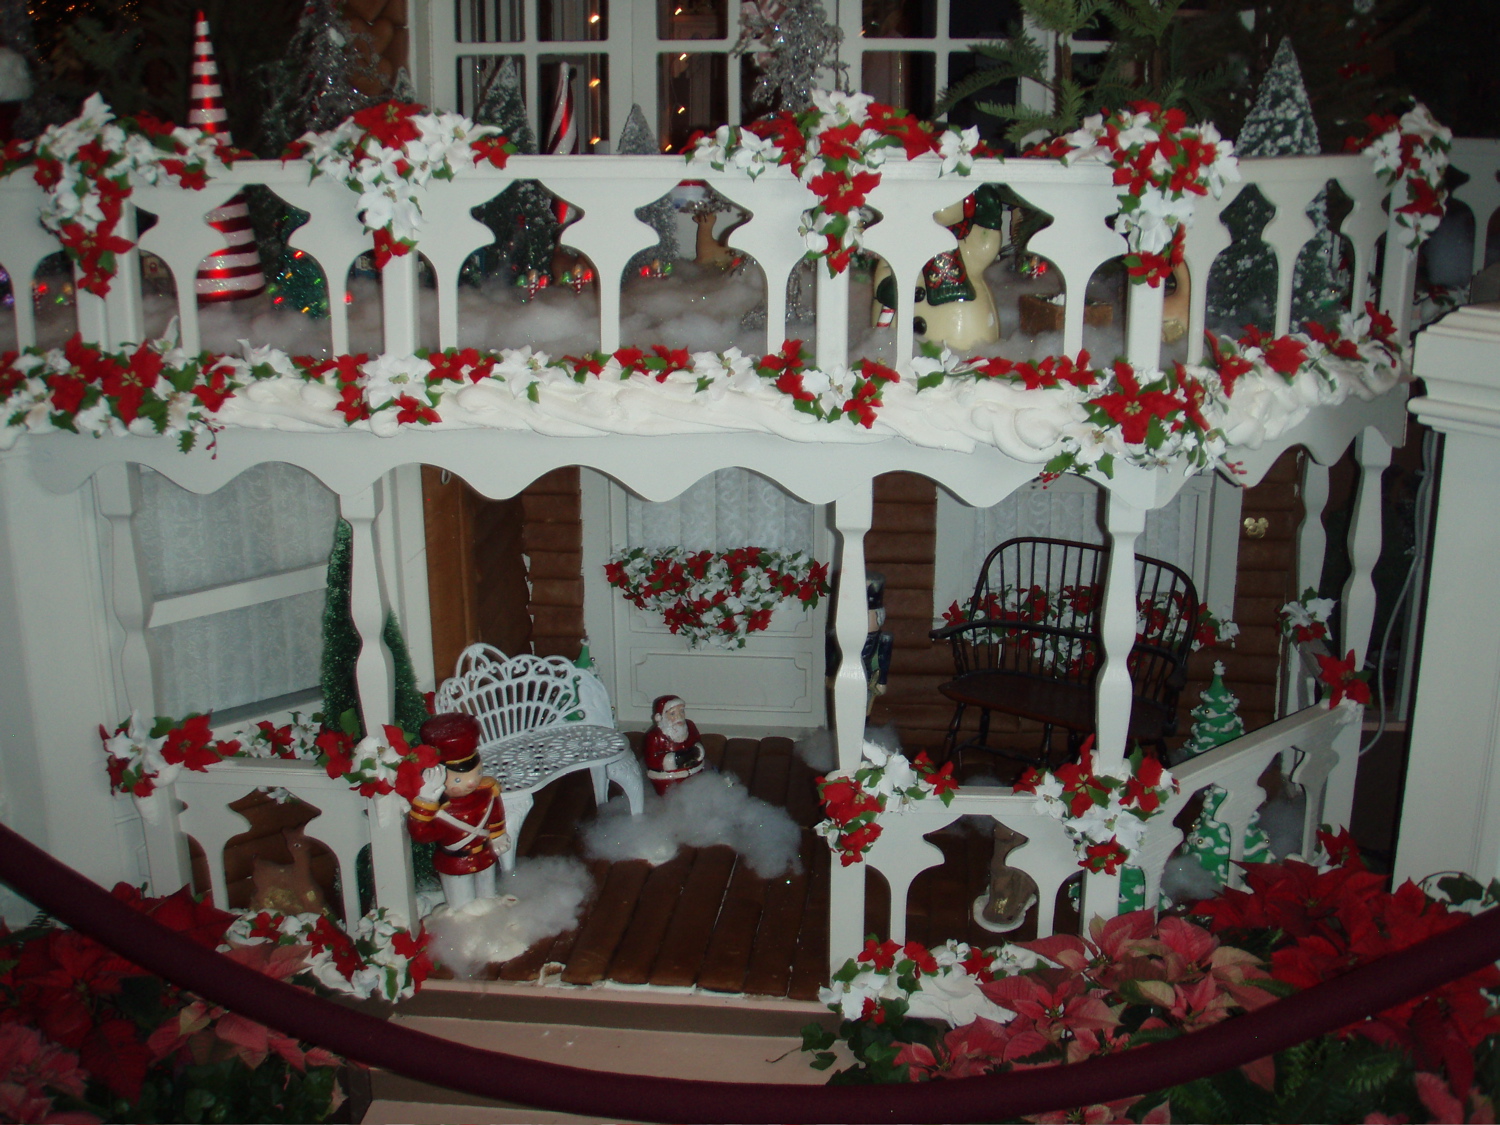 Grand Floridian - Giant Gingerbread House